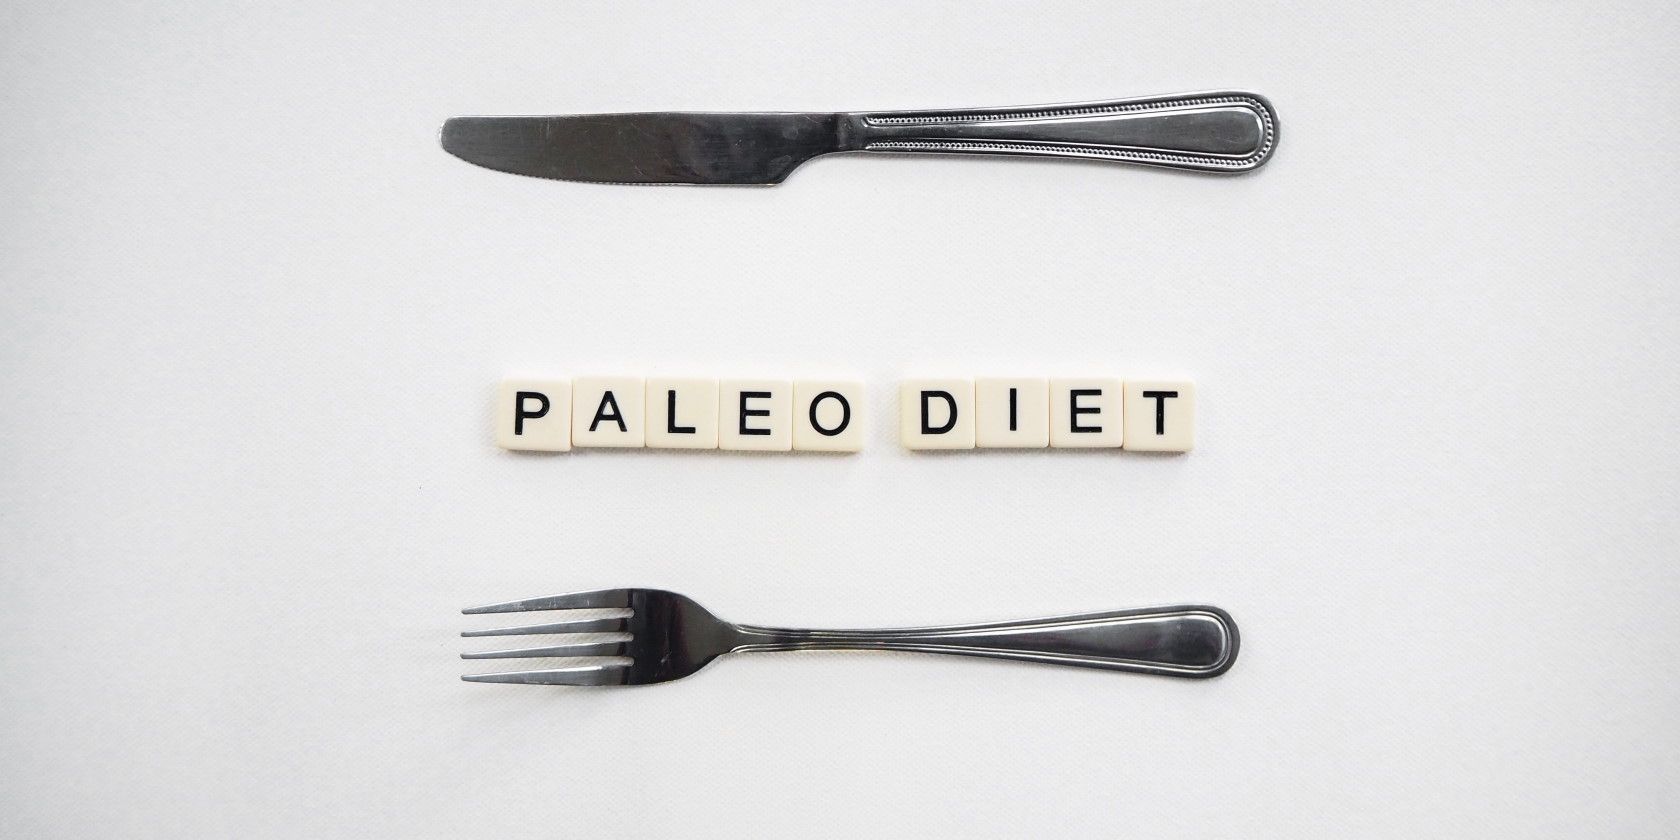 knife and fork on tabletop next to tiles spelling out paleo diet